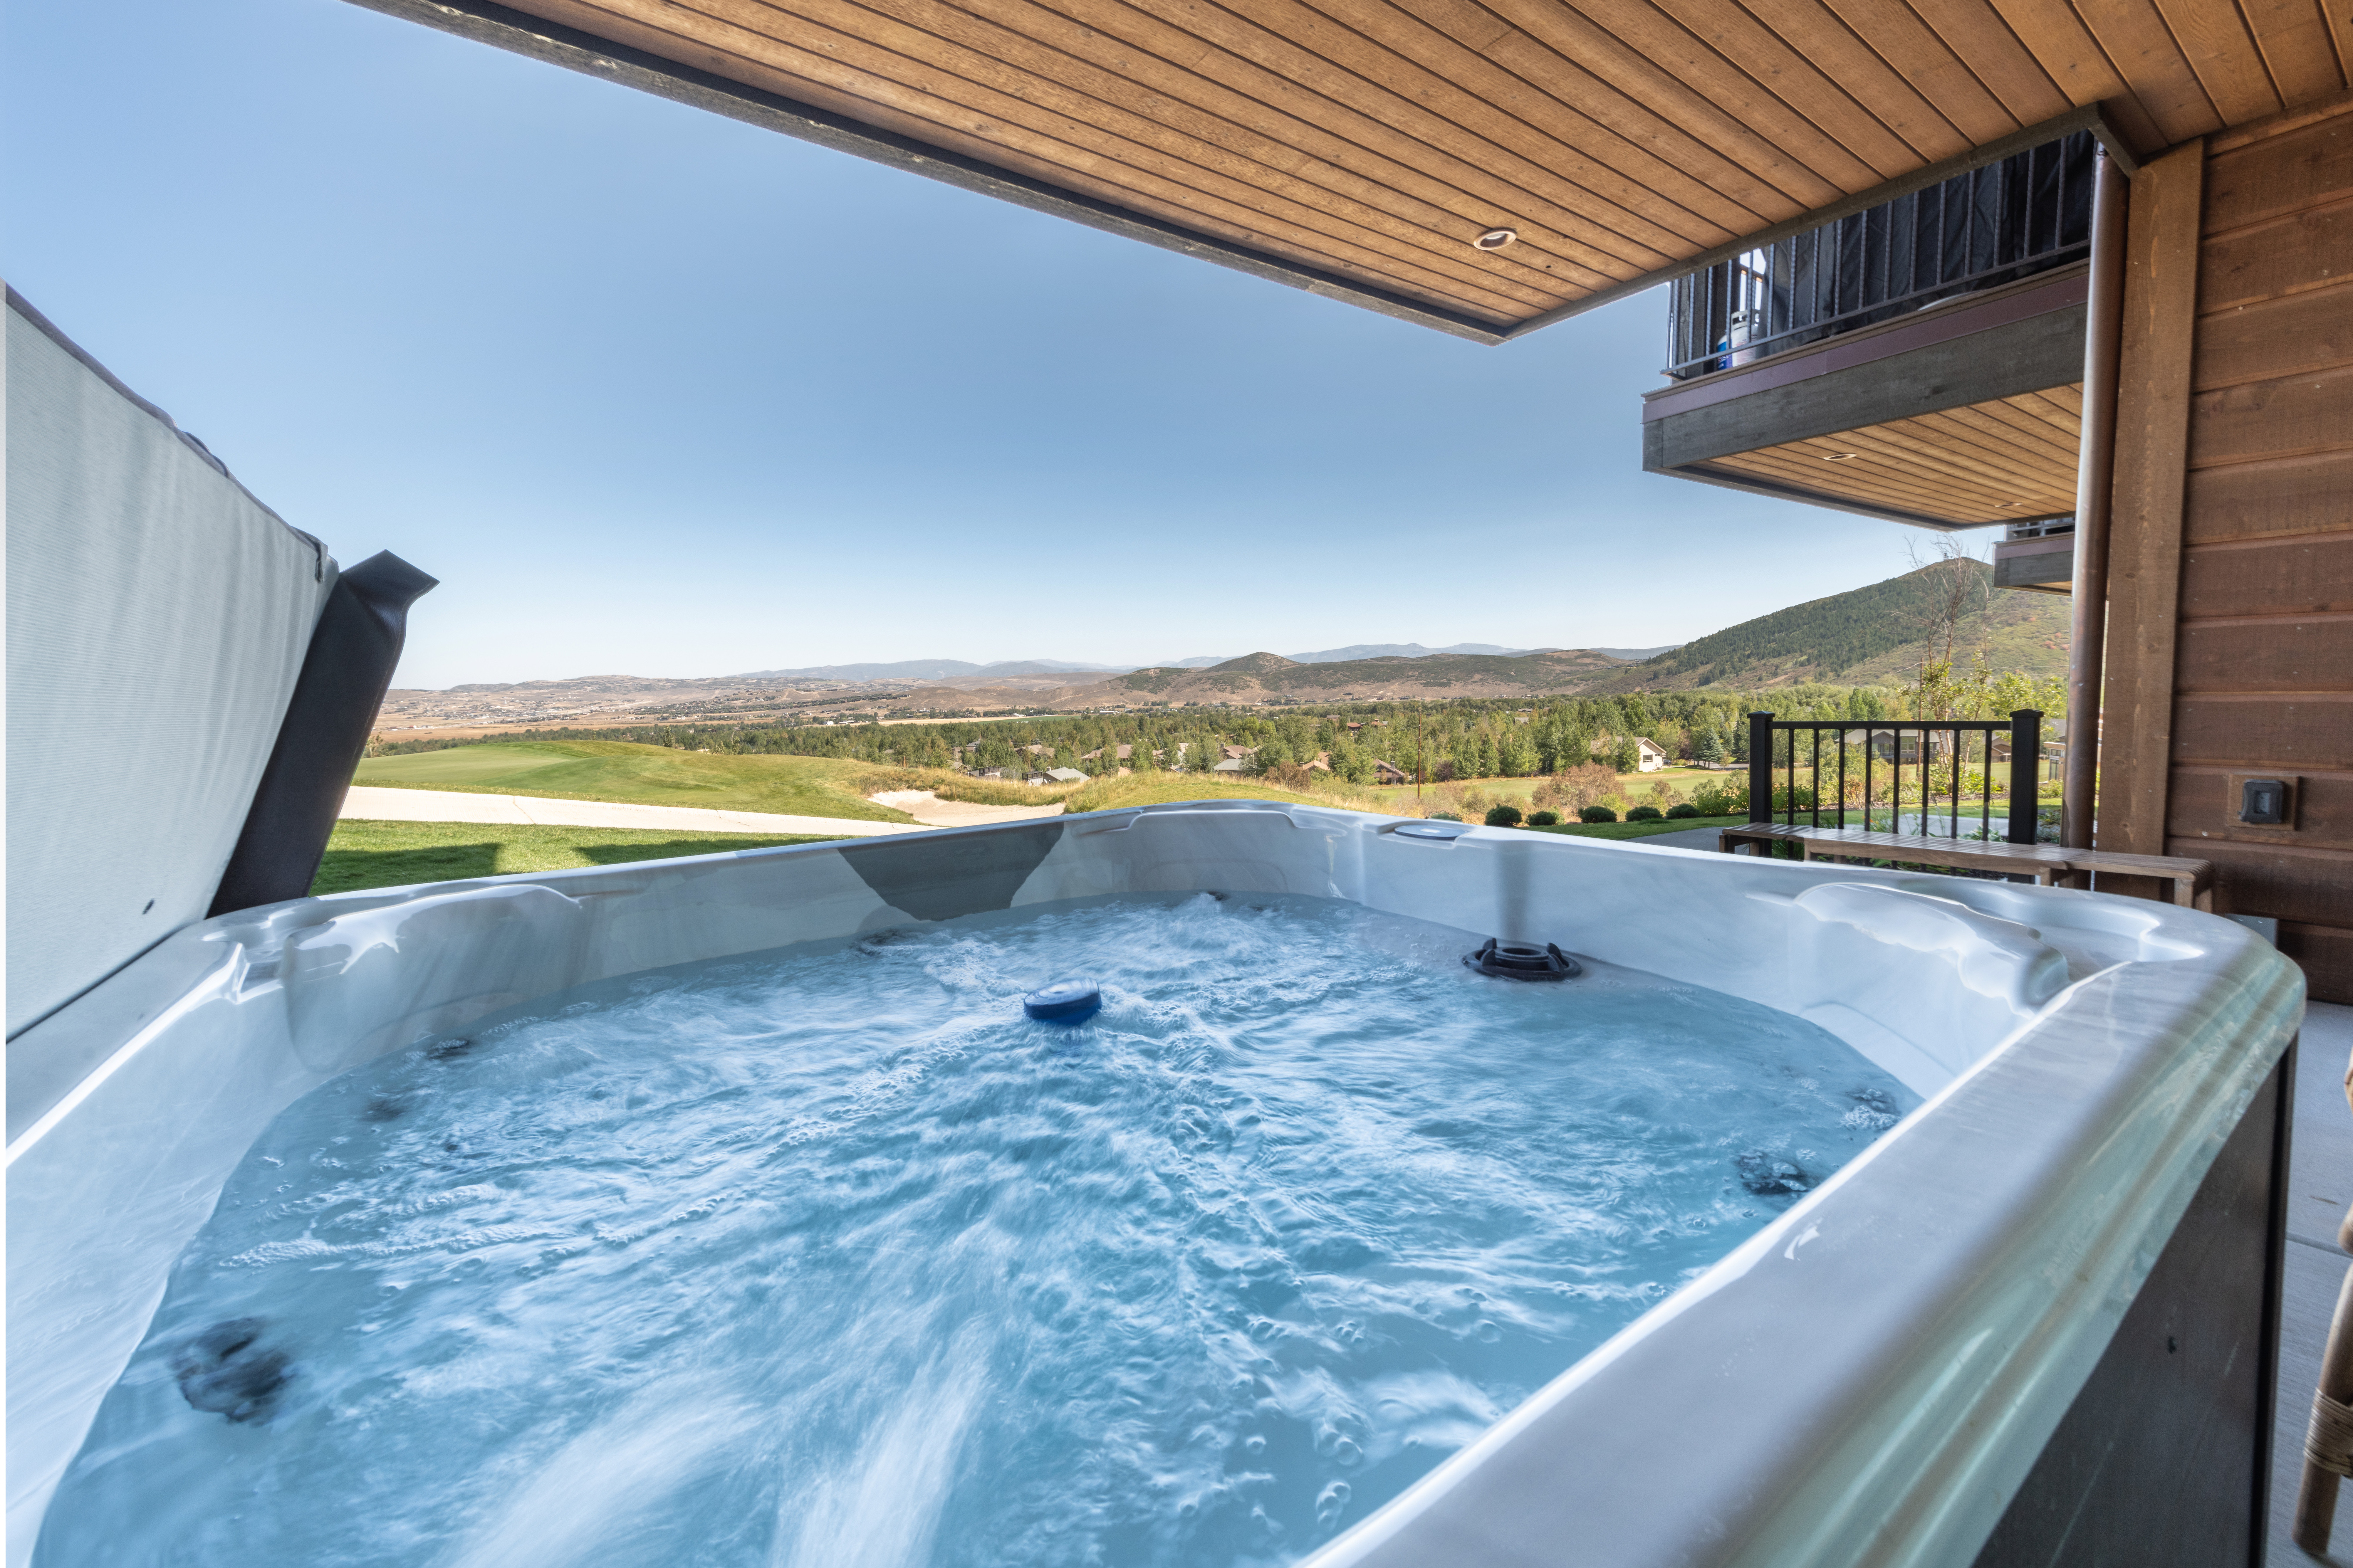 Private oversized hot tub with views of the golf course and valley